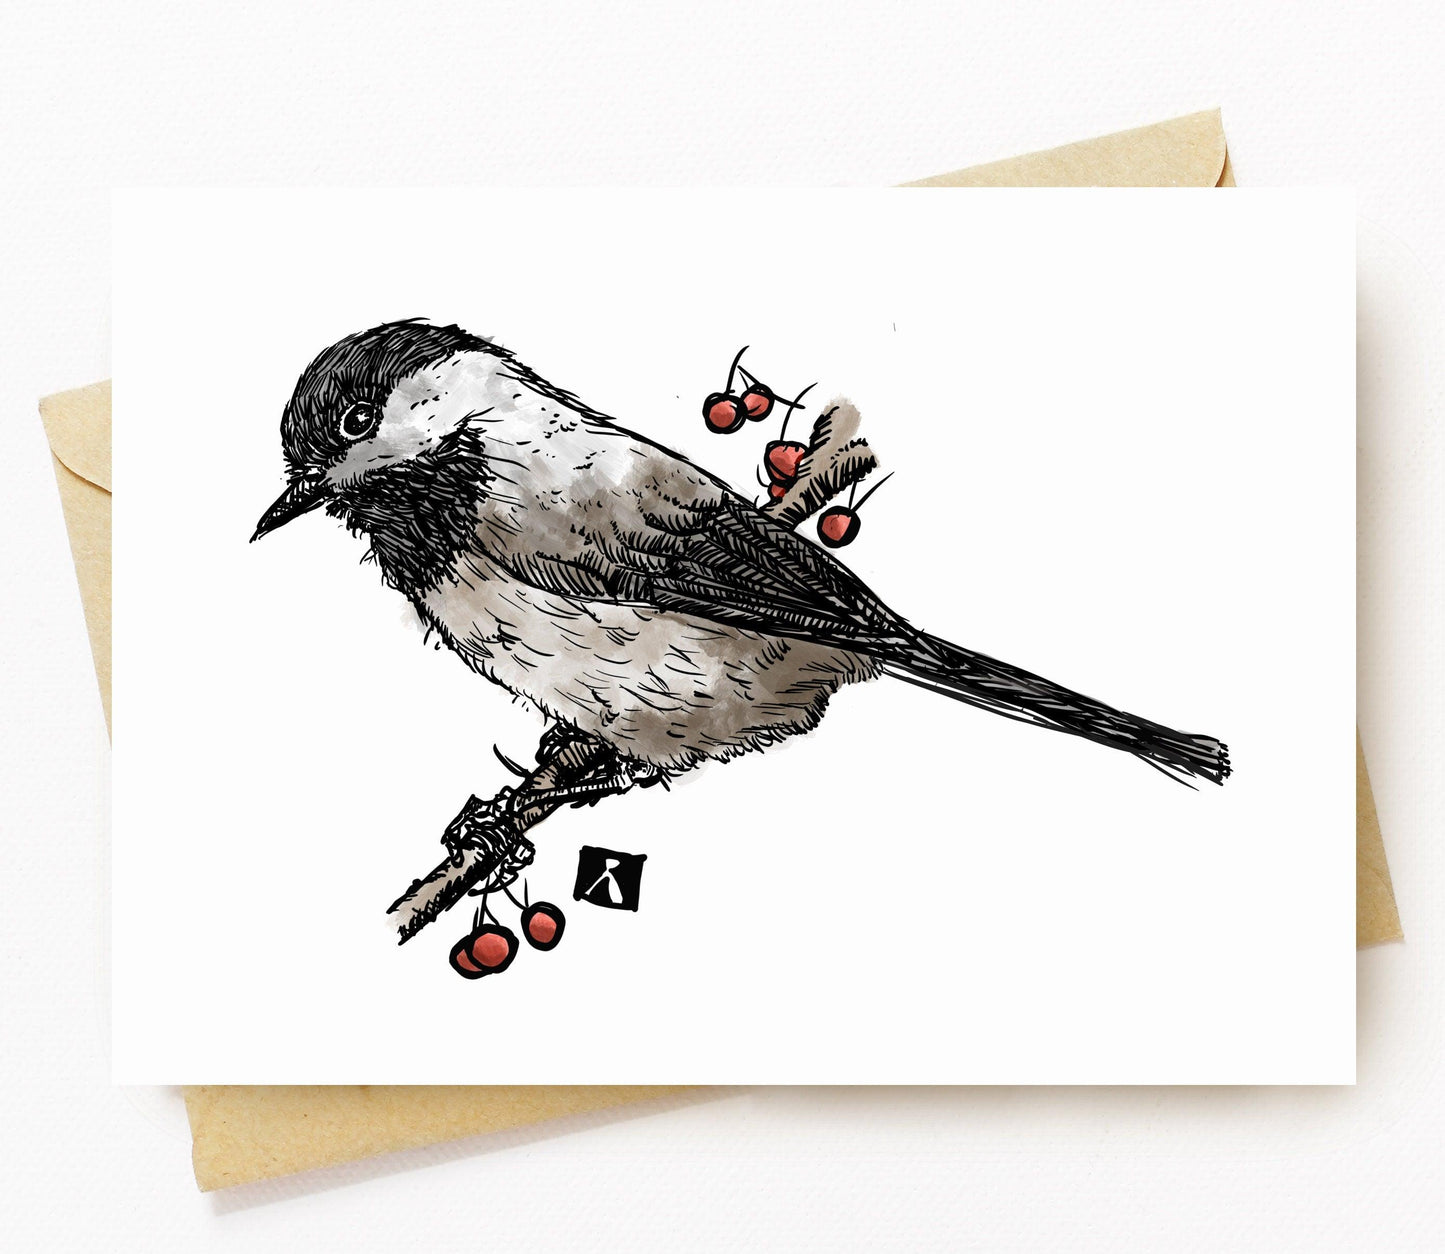 BellavanceInk: Greeting Card With Black Capped Chickadee On A Tree Branch Pen & Ink Watercolor Illustration 5 x 7 Inches - BellavanceInk